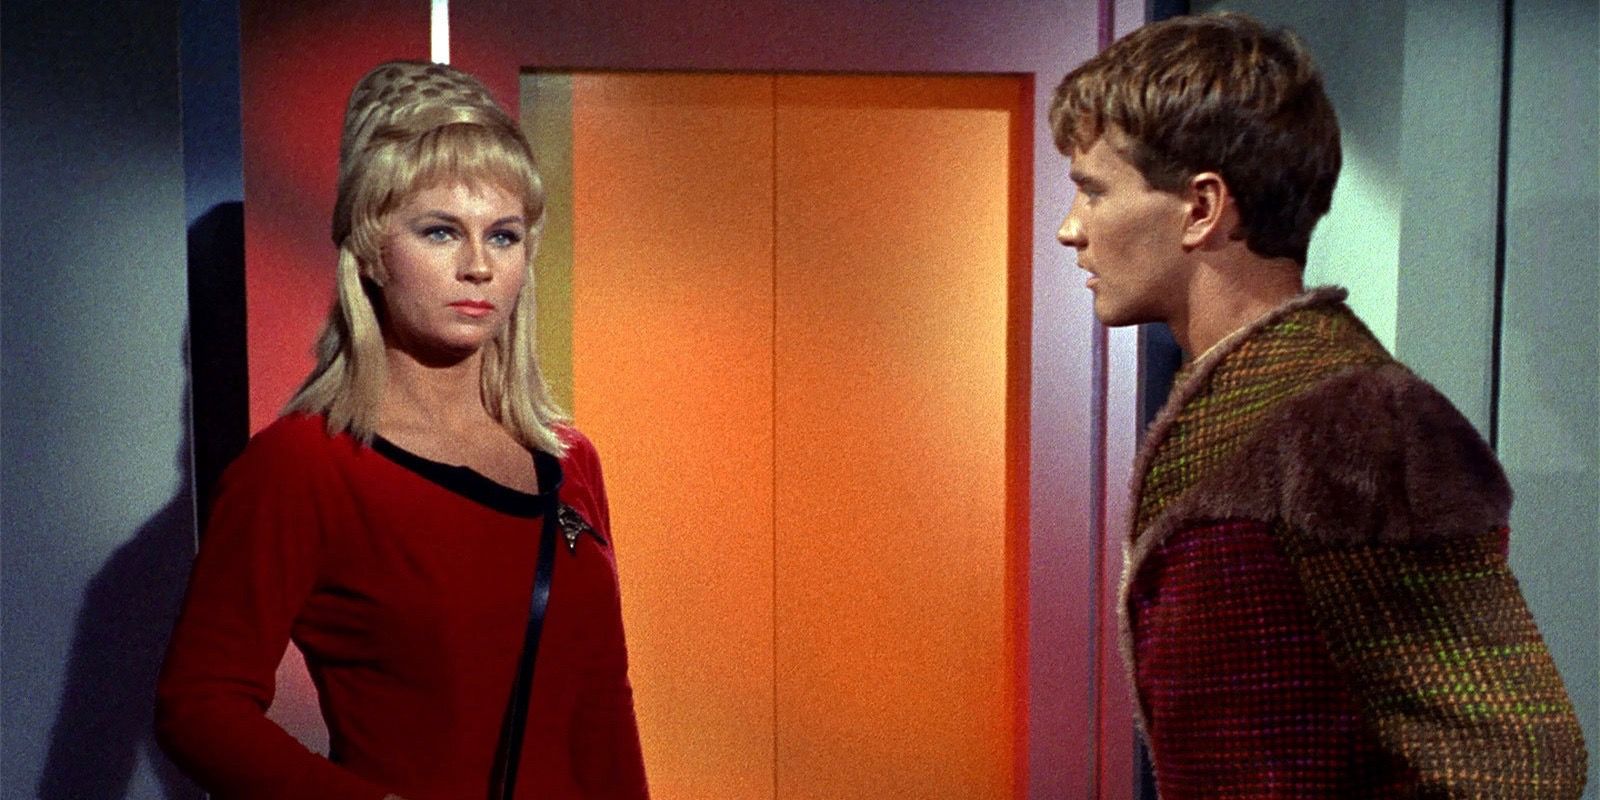 A picture of Charlie Evans and Yeoman Rand in Star Trek is shown.